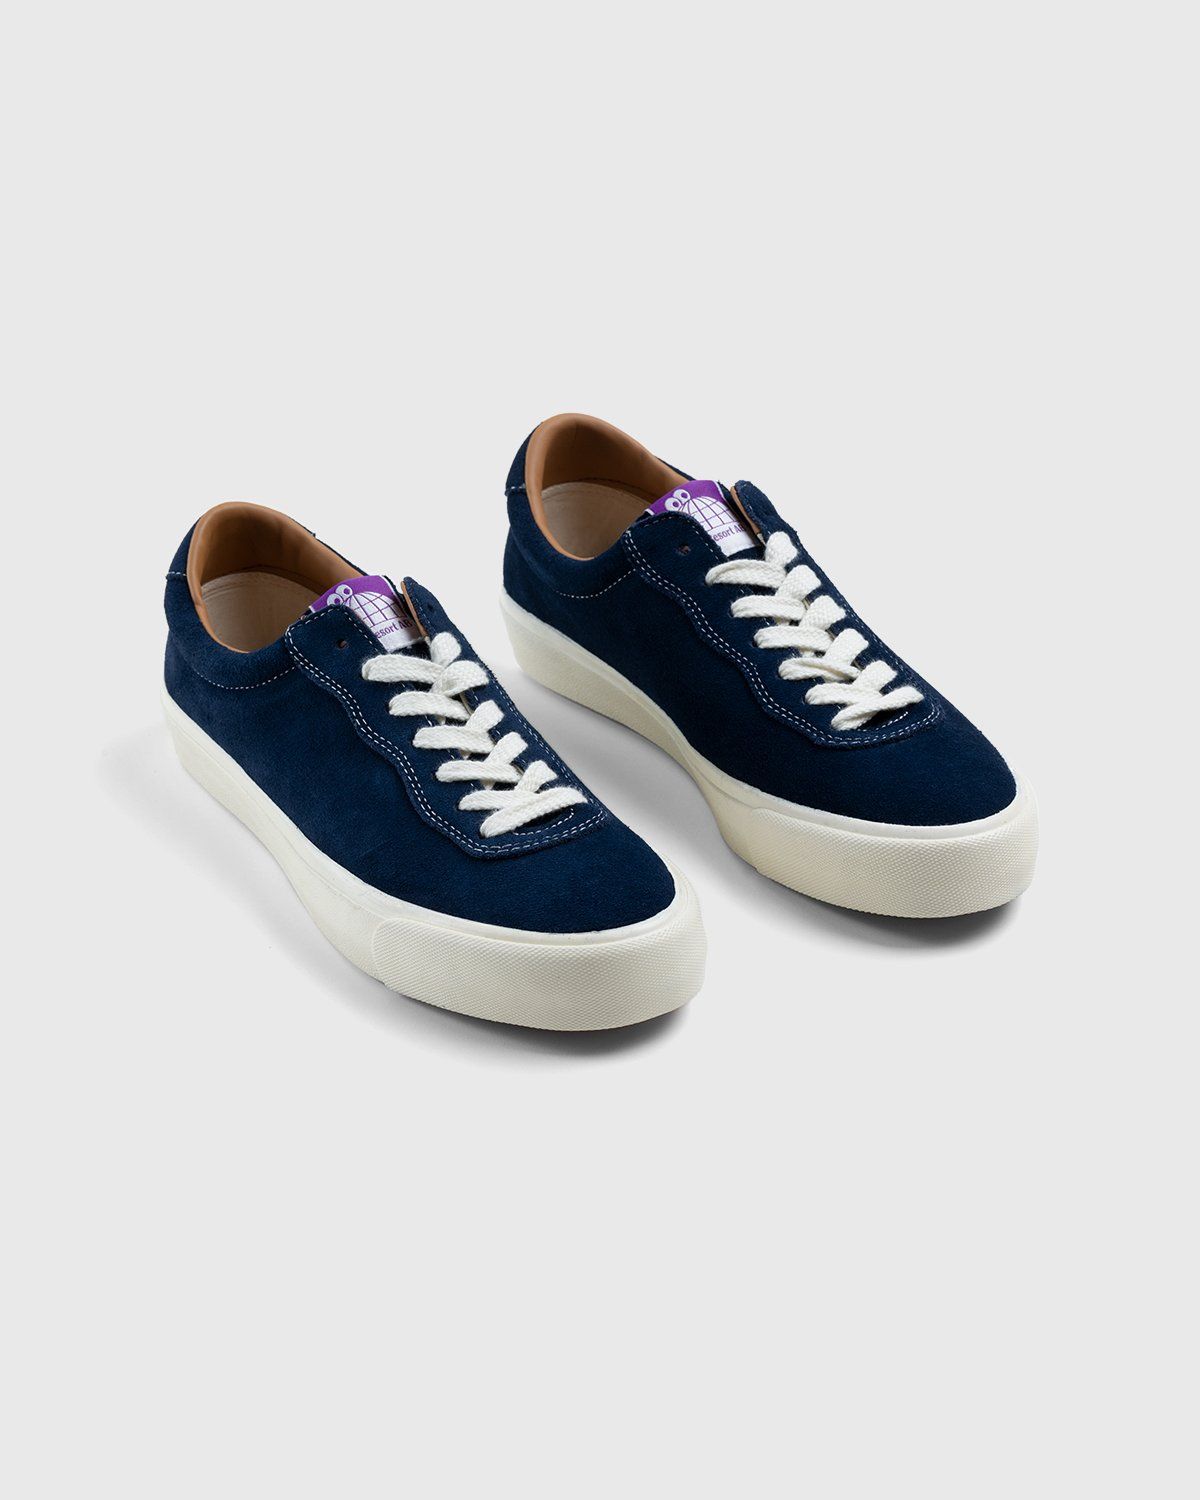 Last Resort AB – VM001 Lo Suede Old Blue/White - Sneakers - Blue - Image 3